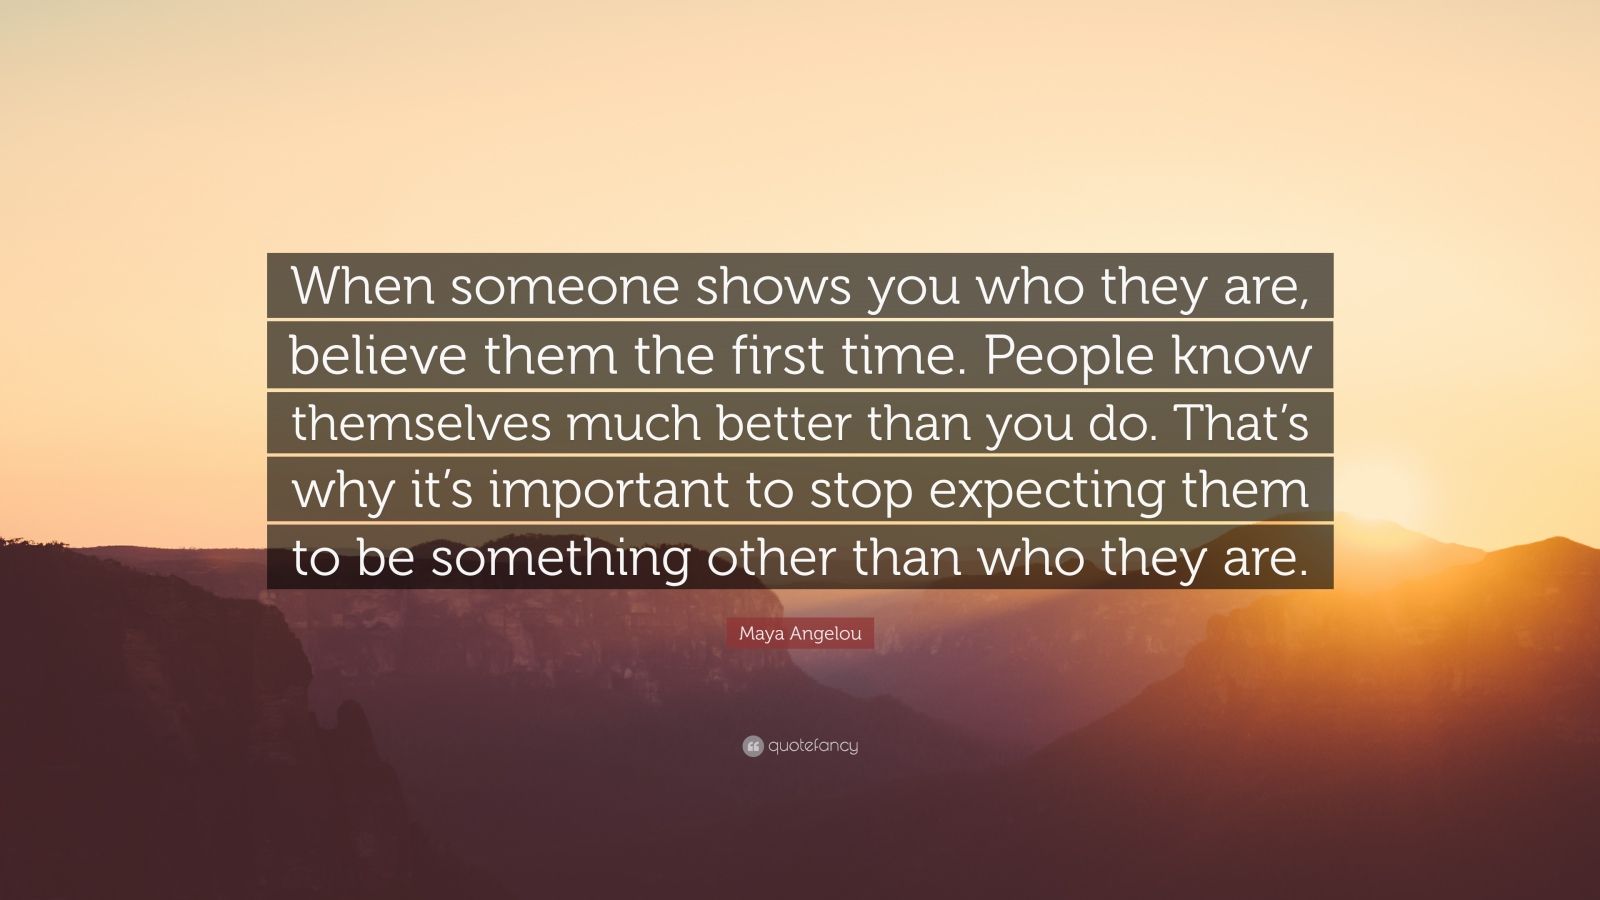 473770 Maya Angelou Quote When someone shows you who they are believe